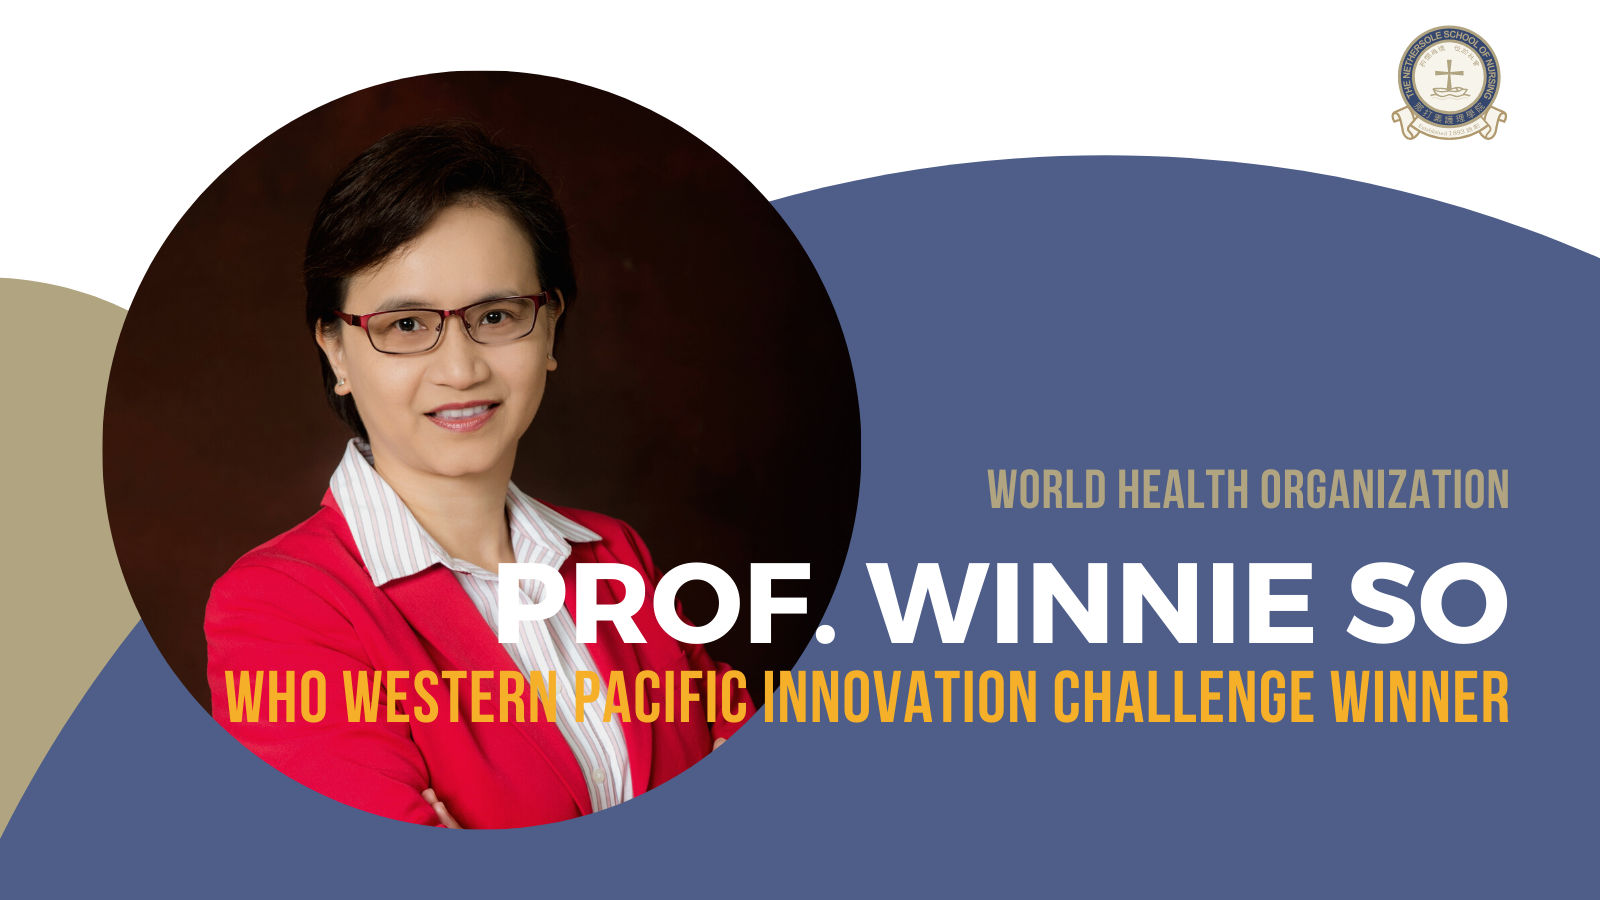 Professor Winnie So being selected as one of the awardees of the WHO Western Pacific Innovation Challenge